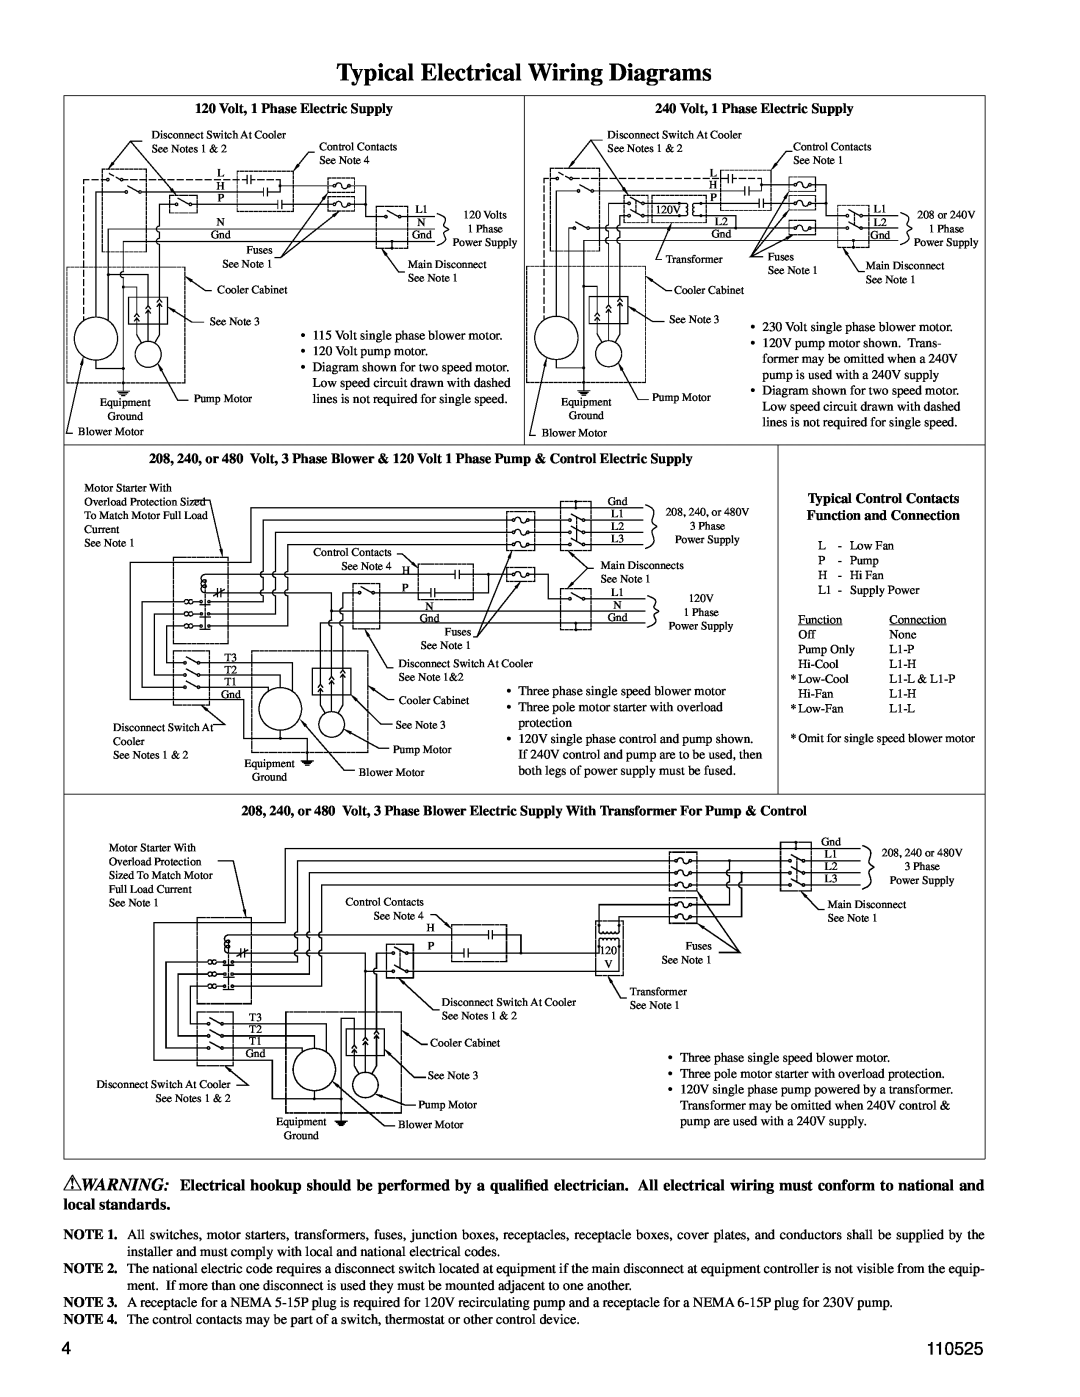 Essick Air 21 DD, 14 DD installation instructions Typical Electrical Wiring Diagrams, 110525, Volt, 1 Phase Electric Supply 